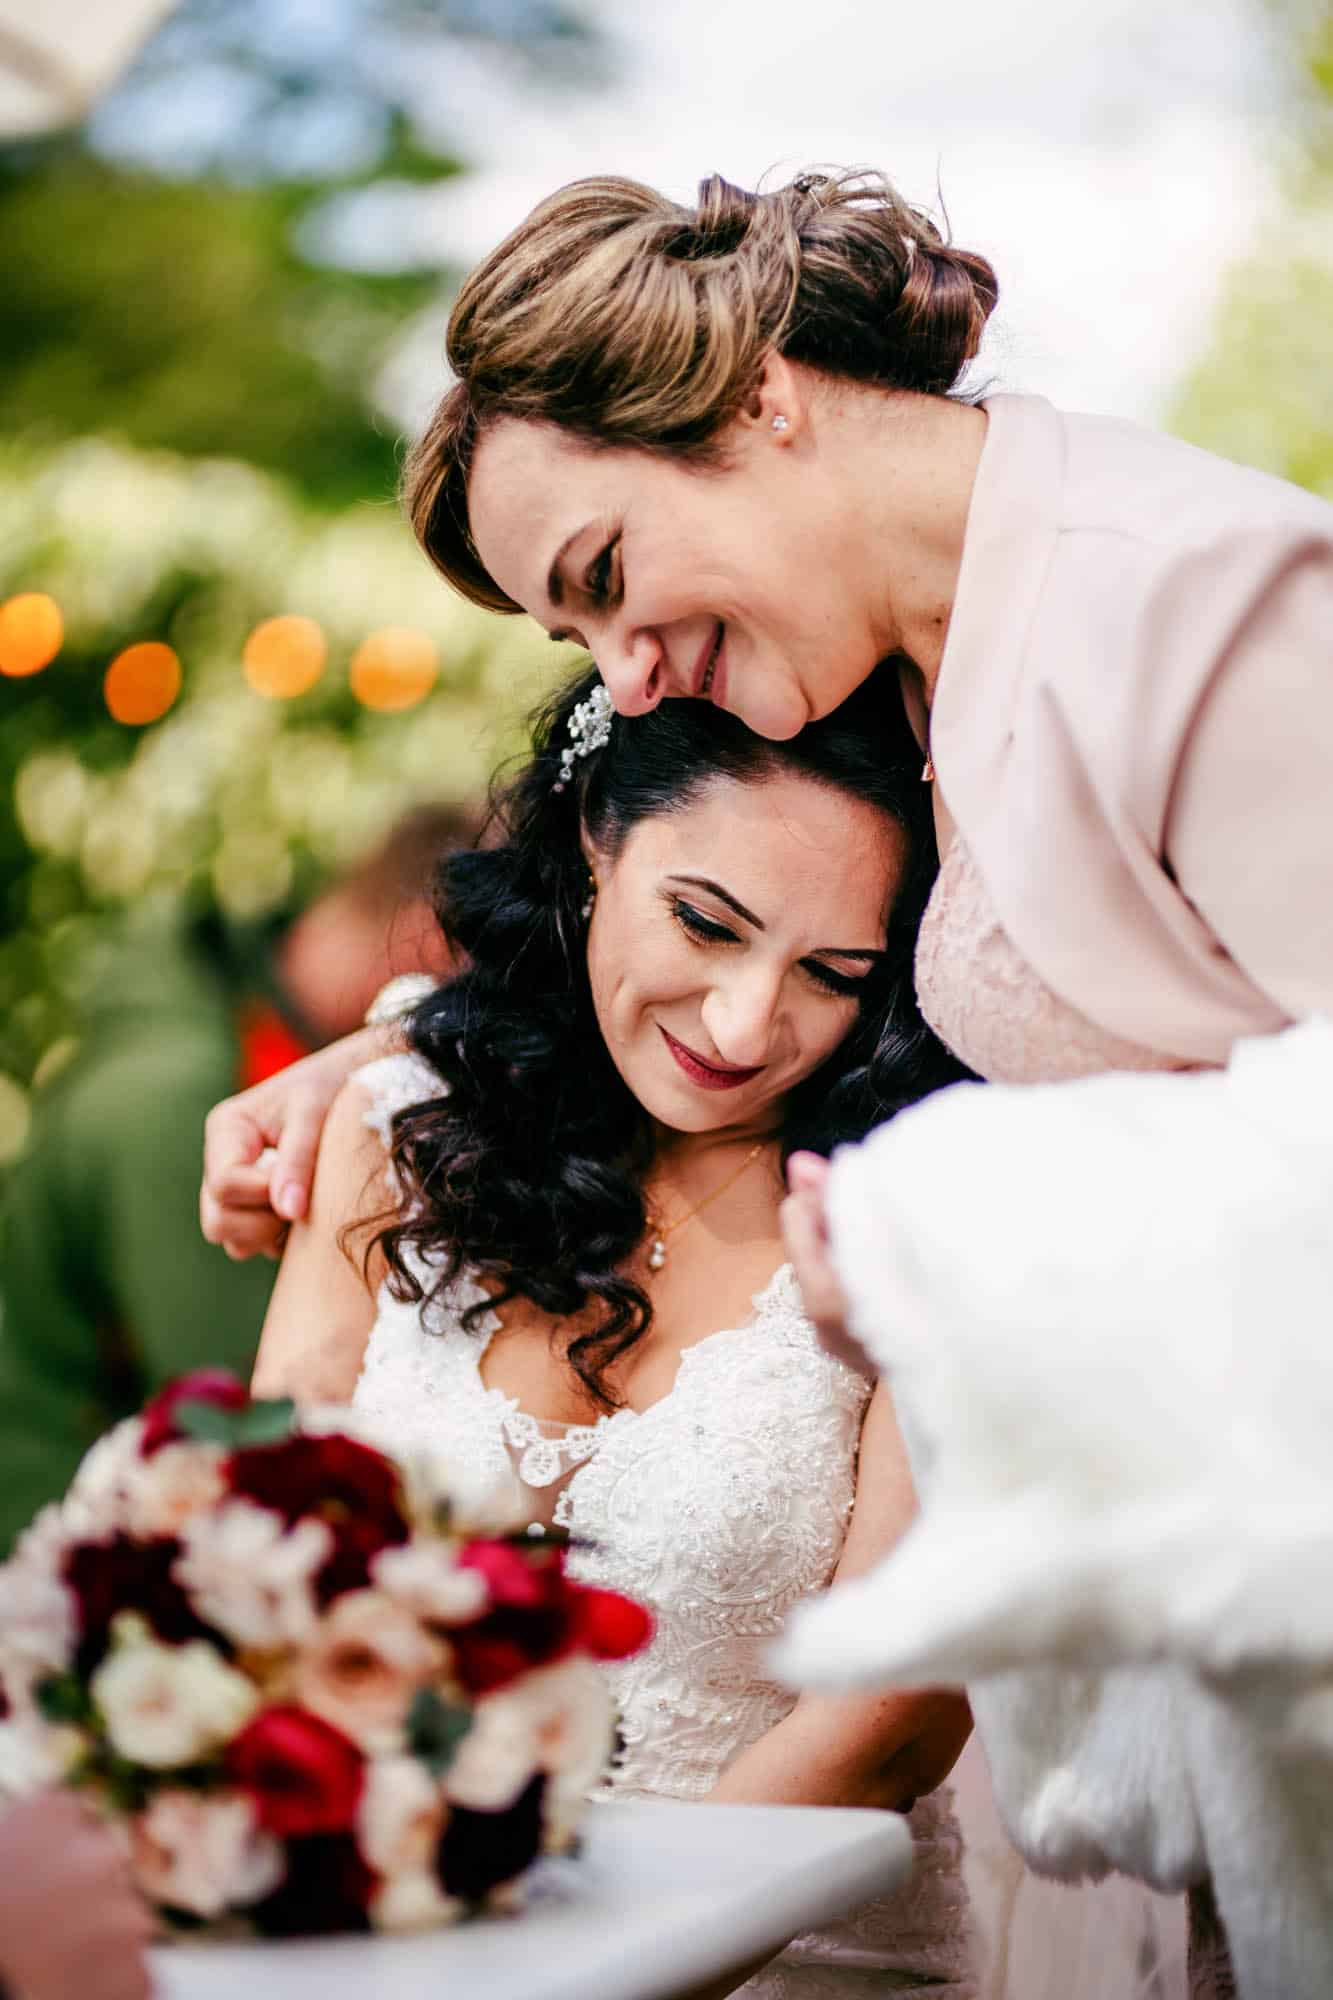 A bride and her mother hug each other at a wedding.